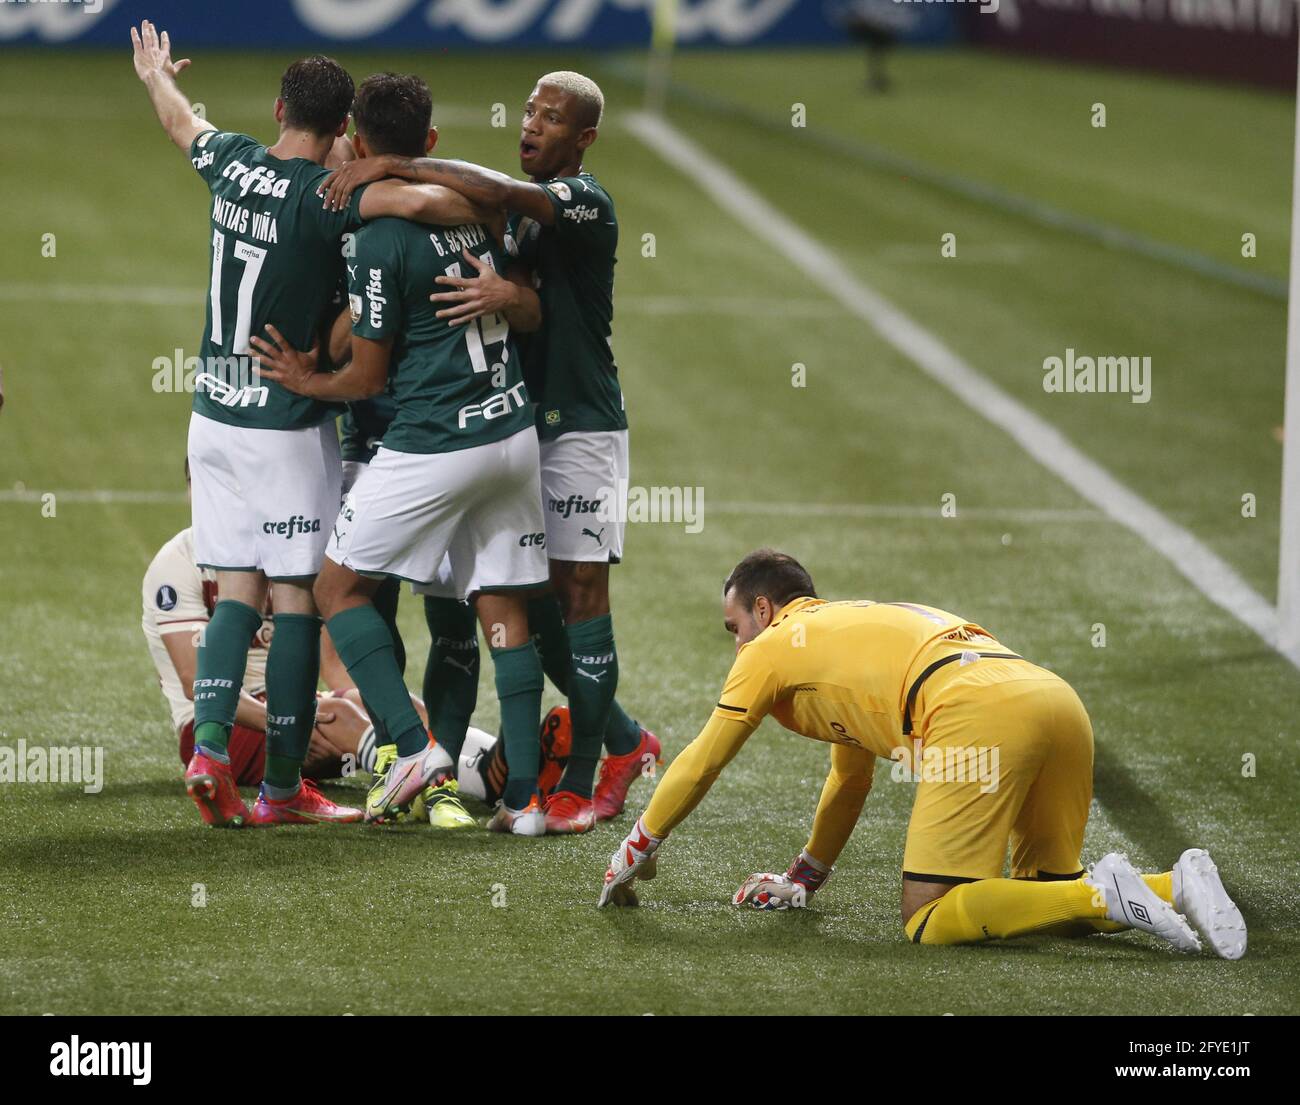 Sao Paulo, Brazil. 23rd Mar, 2022. SP - Sao Paulo - 03/23/2022 - PAULISTA  2022, PALMEIRAS X ITUANO - Rony, a Palmeiras player, celebrates his goal  with players from his team during